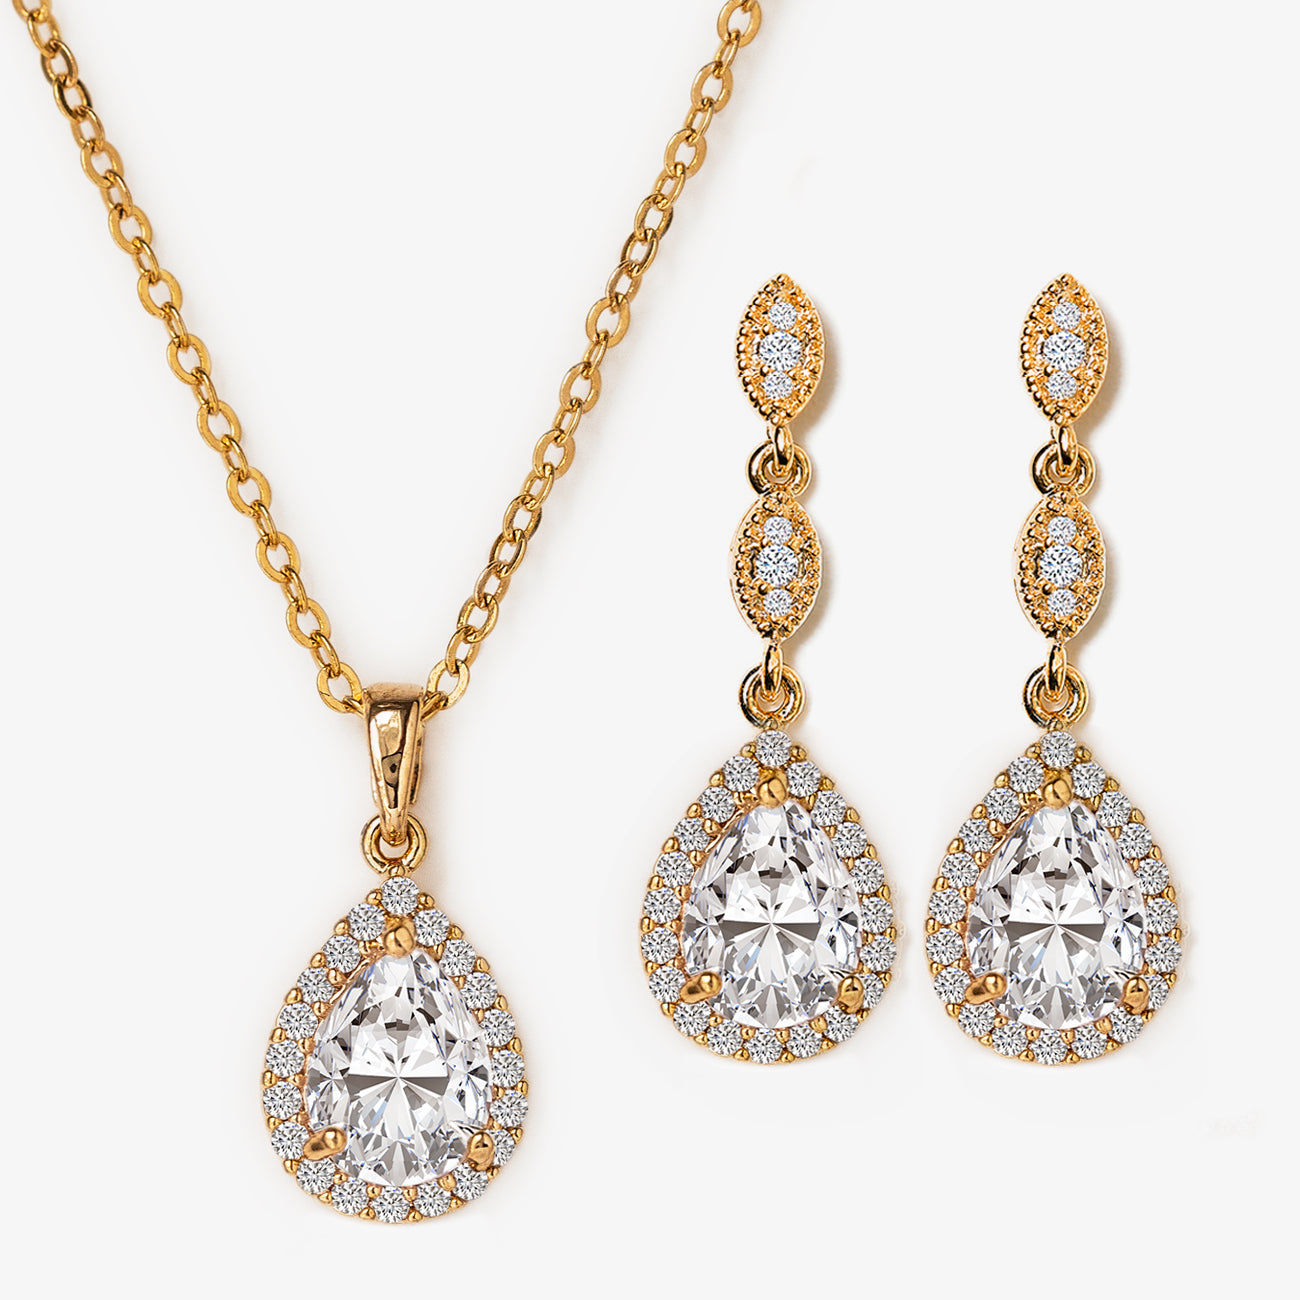 Crystal Necklace Jewelry Set - Ideal Bridesmaid Jewelry Set JW3067 |  LaceDesign